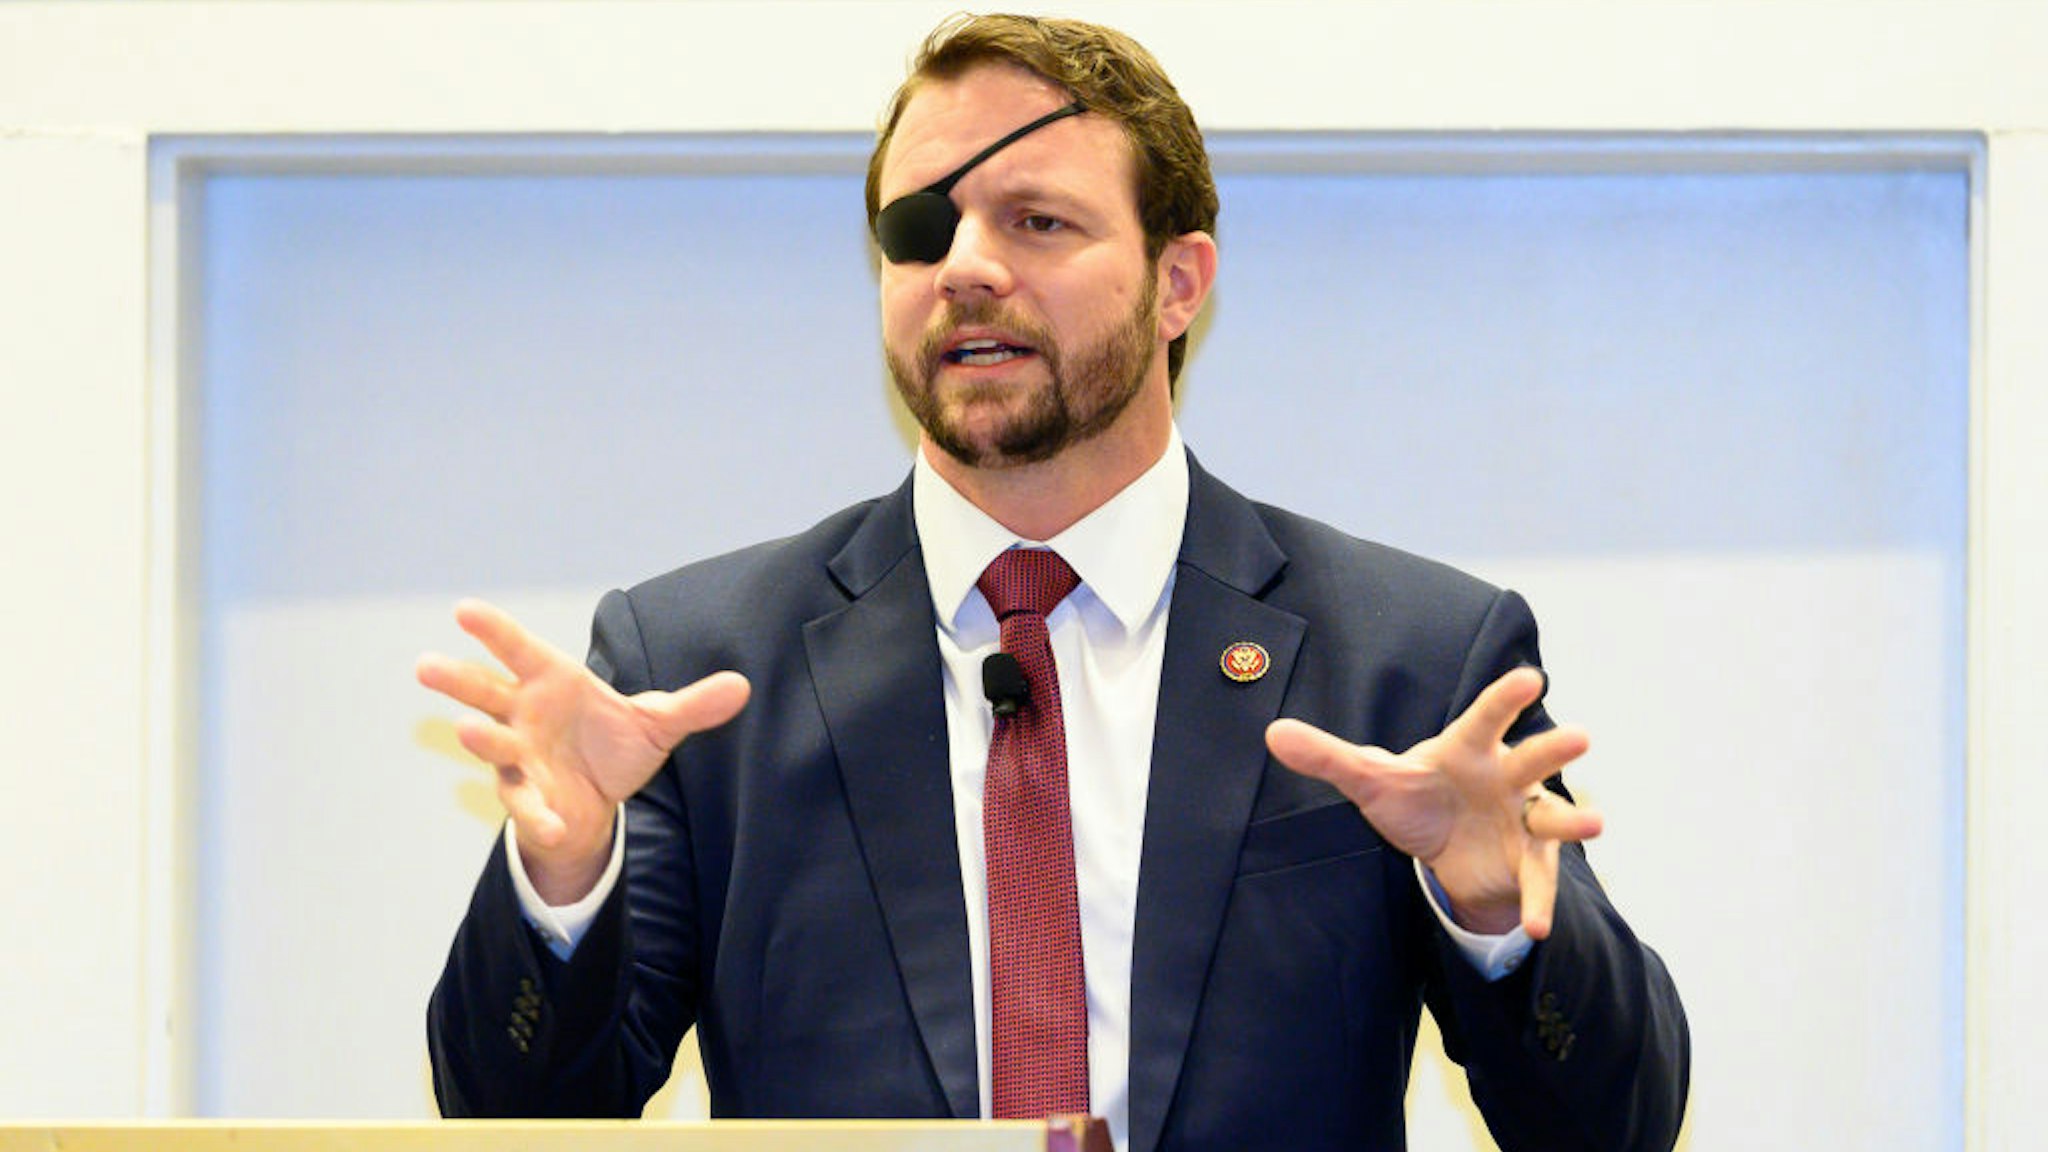 OXON HILL, MD, UNITED STATES - 2019/02/27: U.S. Representative Dan Crenshaw (R-TX) seen speaking at the American Conservative Union's Conservative Political Action Conference (CPAC) at the Gaylord National Resort &amp; Convention Center in Oxon Hill, MD.